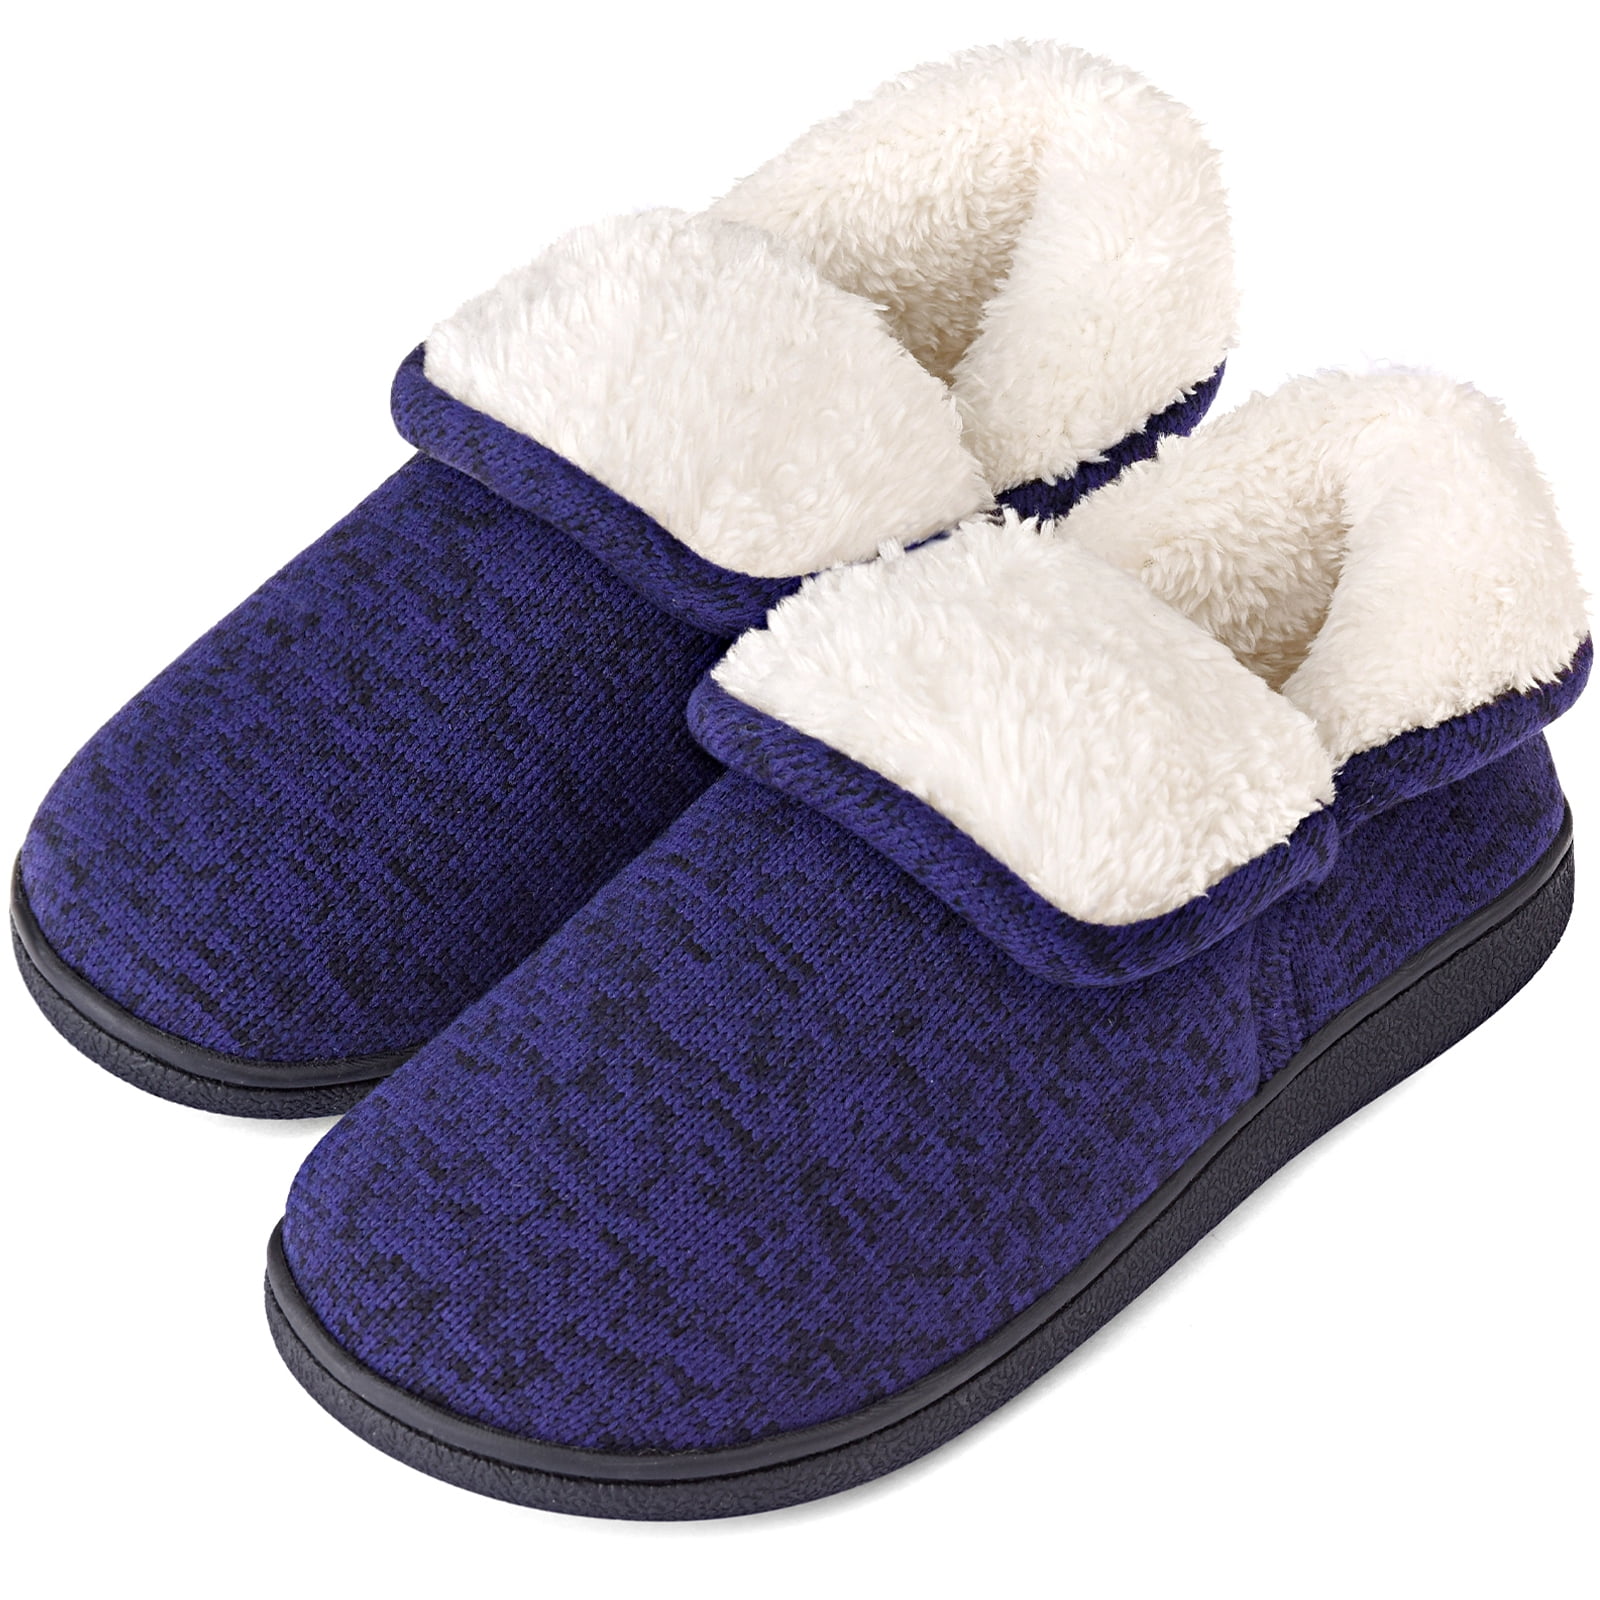 WOMENS COMFY BED TIME WARM INDOOR WINTER SLIPPERS LADIES FAUX FUR HOME SHOES SZ 